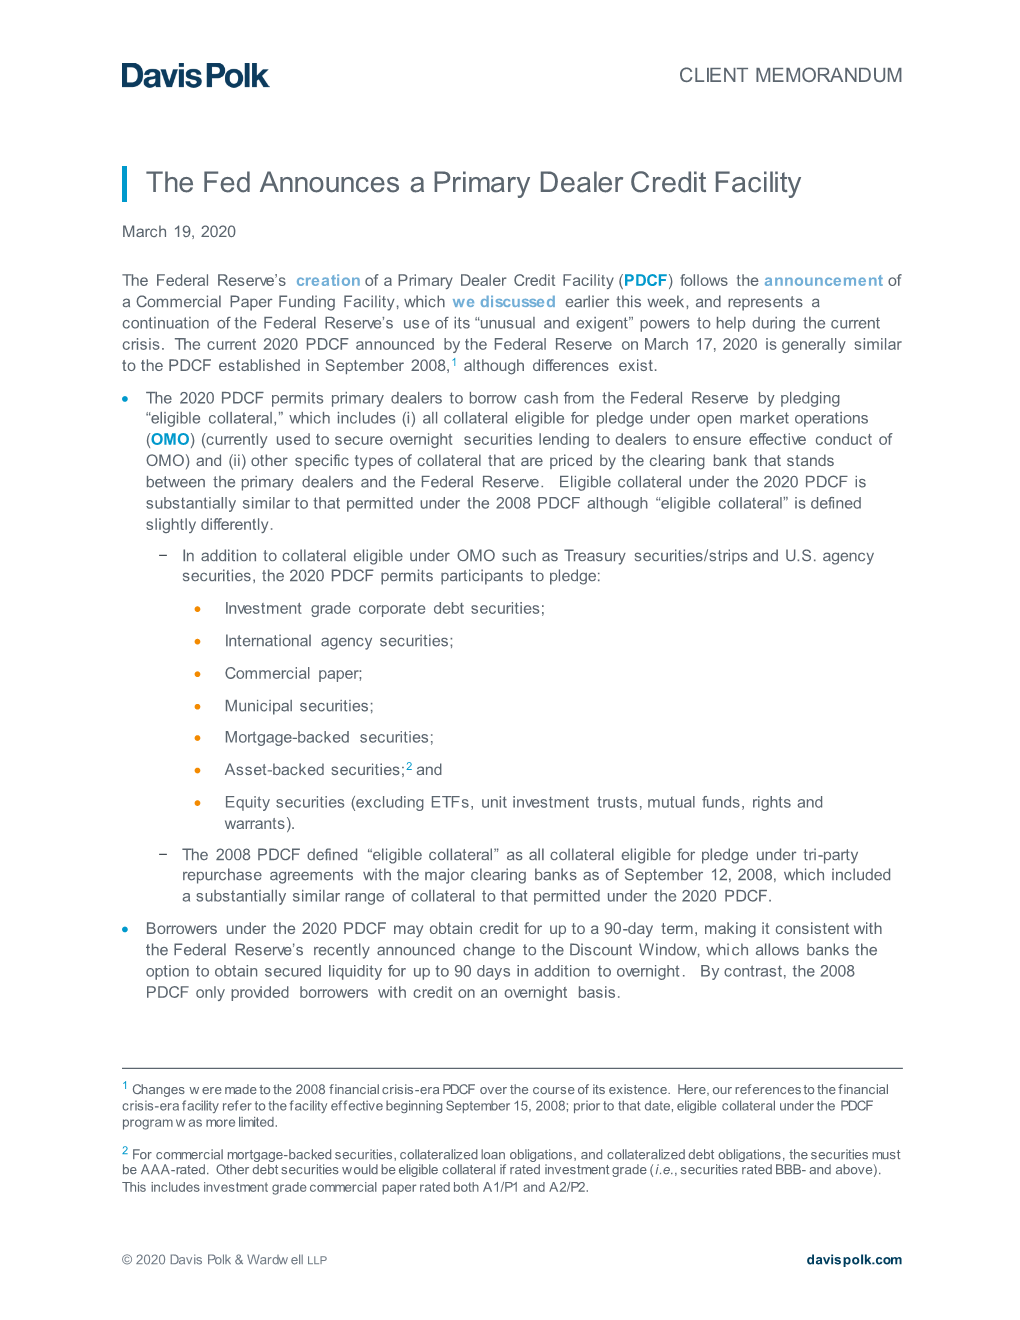 Primary Dealer Credit Facility